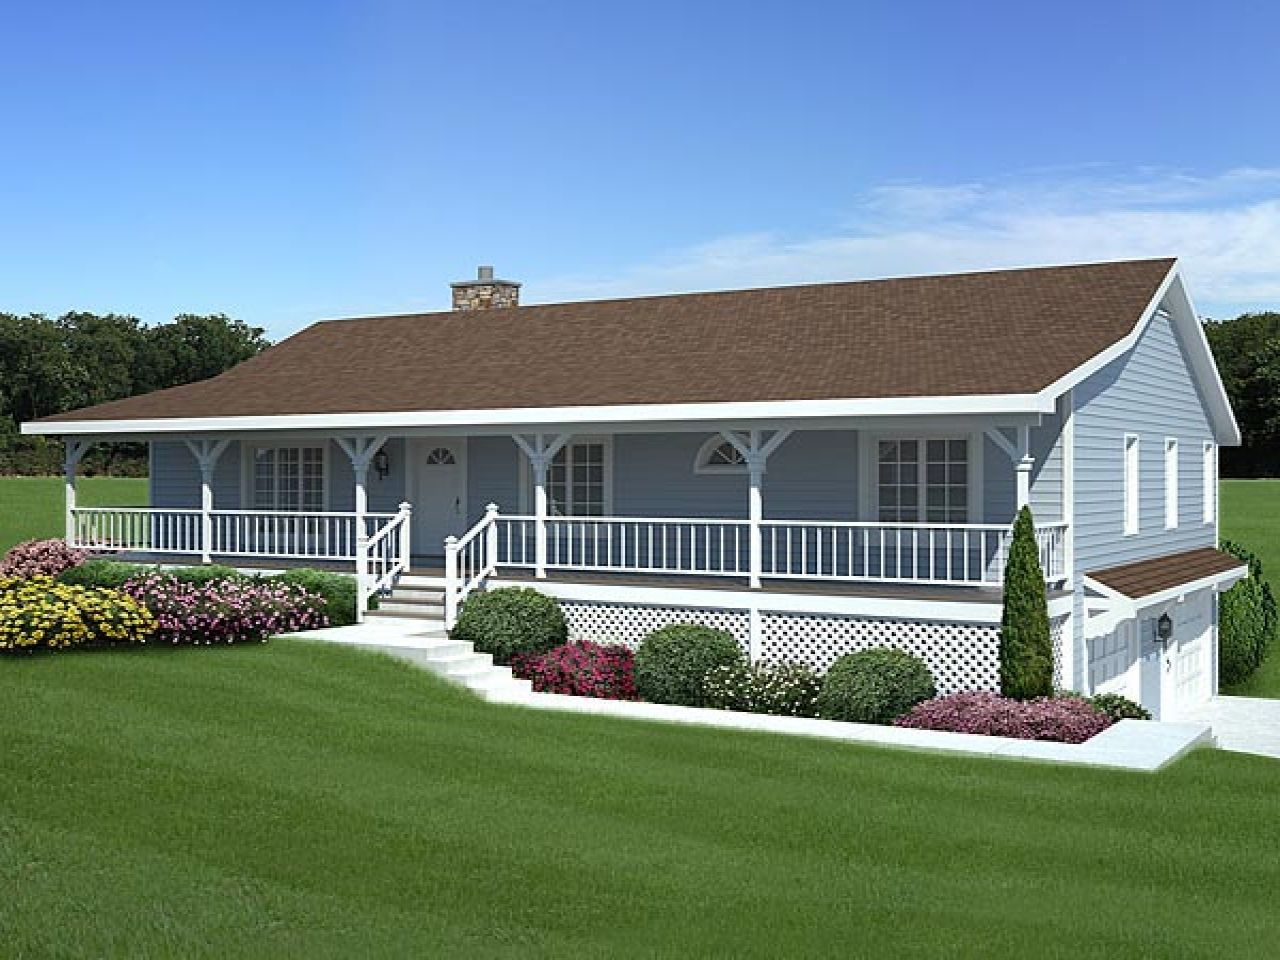 Design Home Architecture Small Ranch House Plans With Front Porch